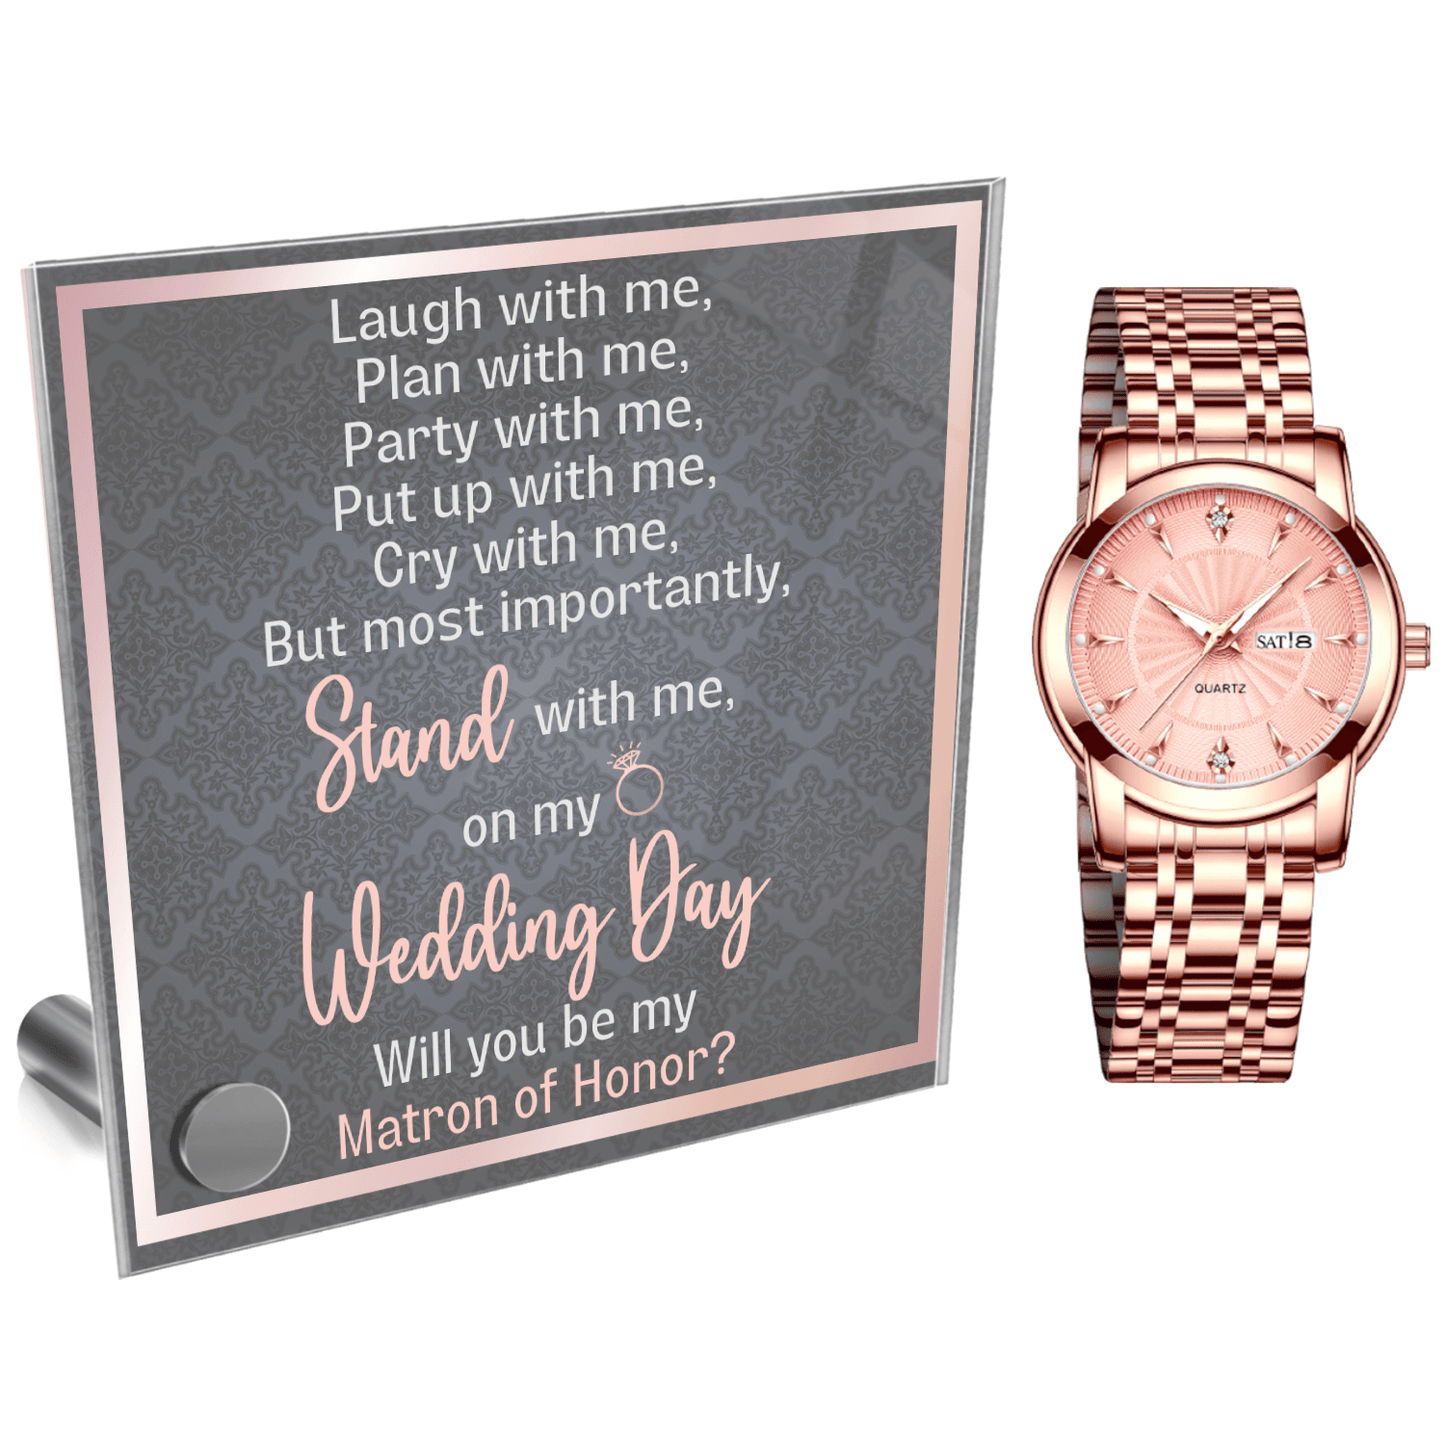 Matron of Honor Proposal Gift Rose Gold Watch - Wedding Party Jewelry Gift - Will You Be My Matron Of Honor - To Matron of Honor From Bride